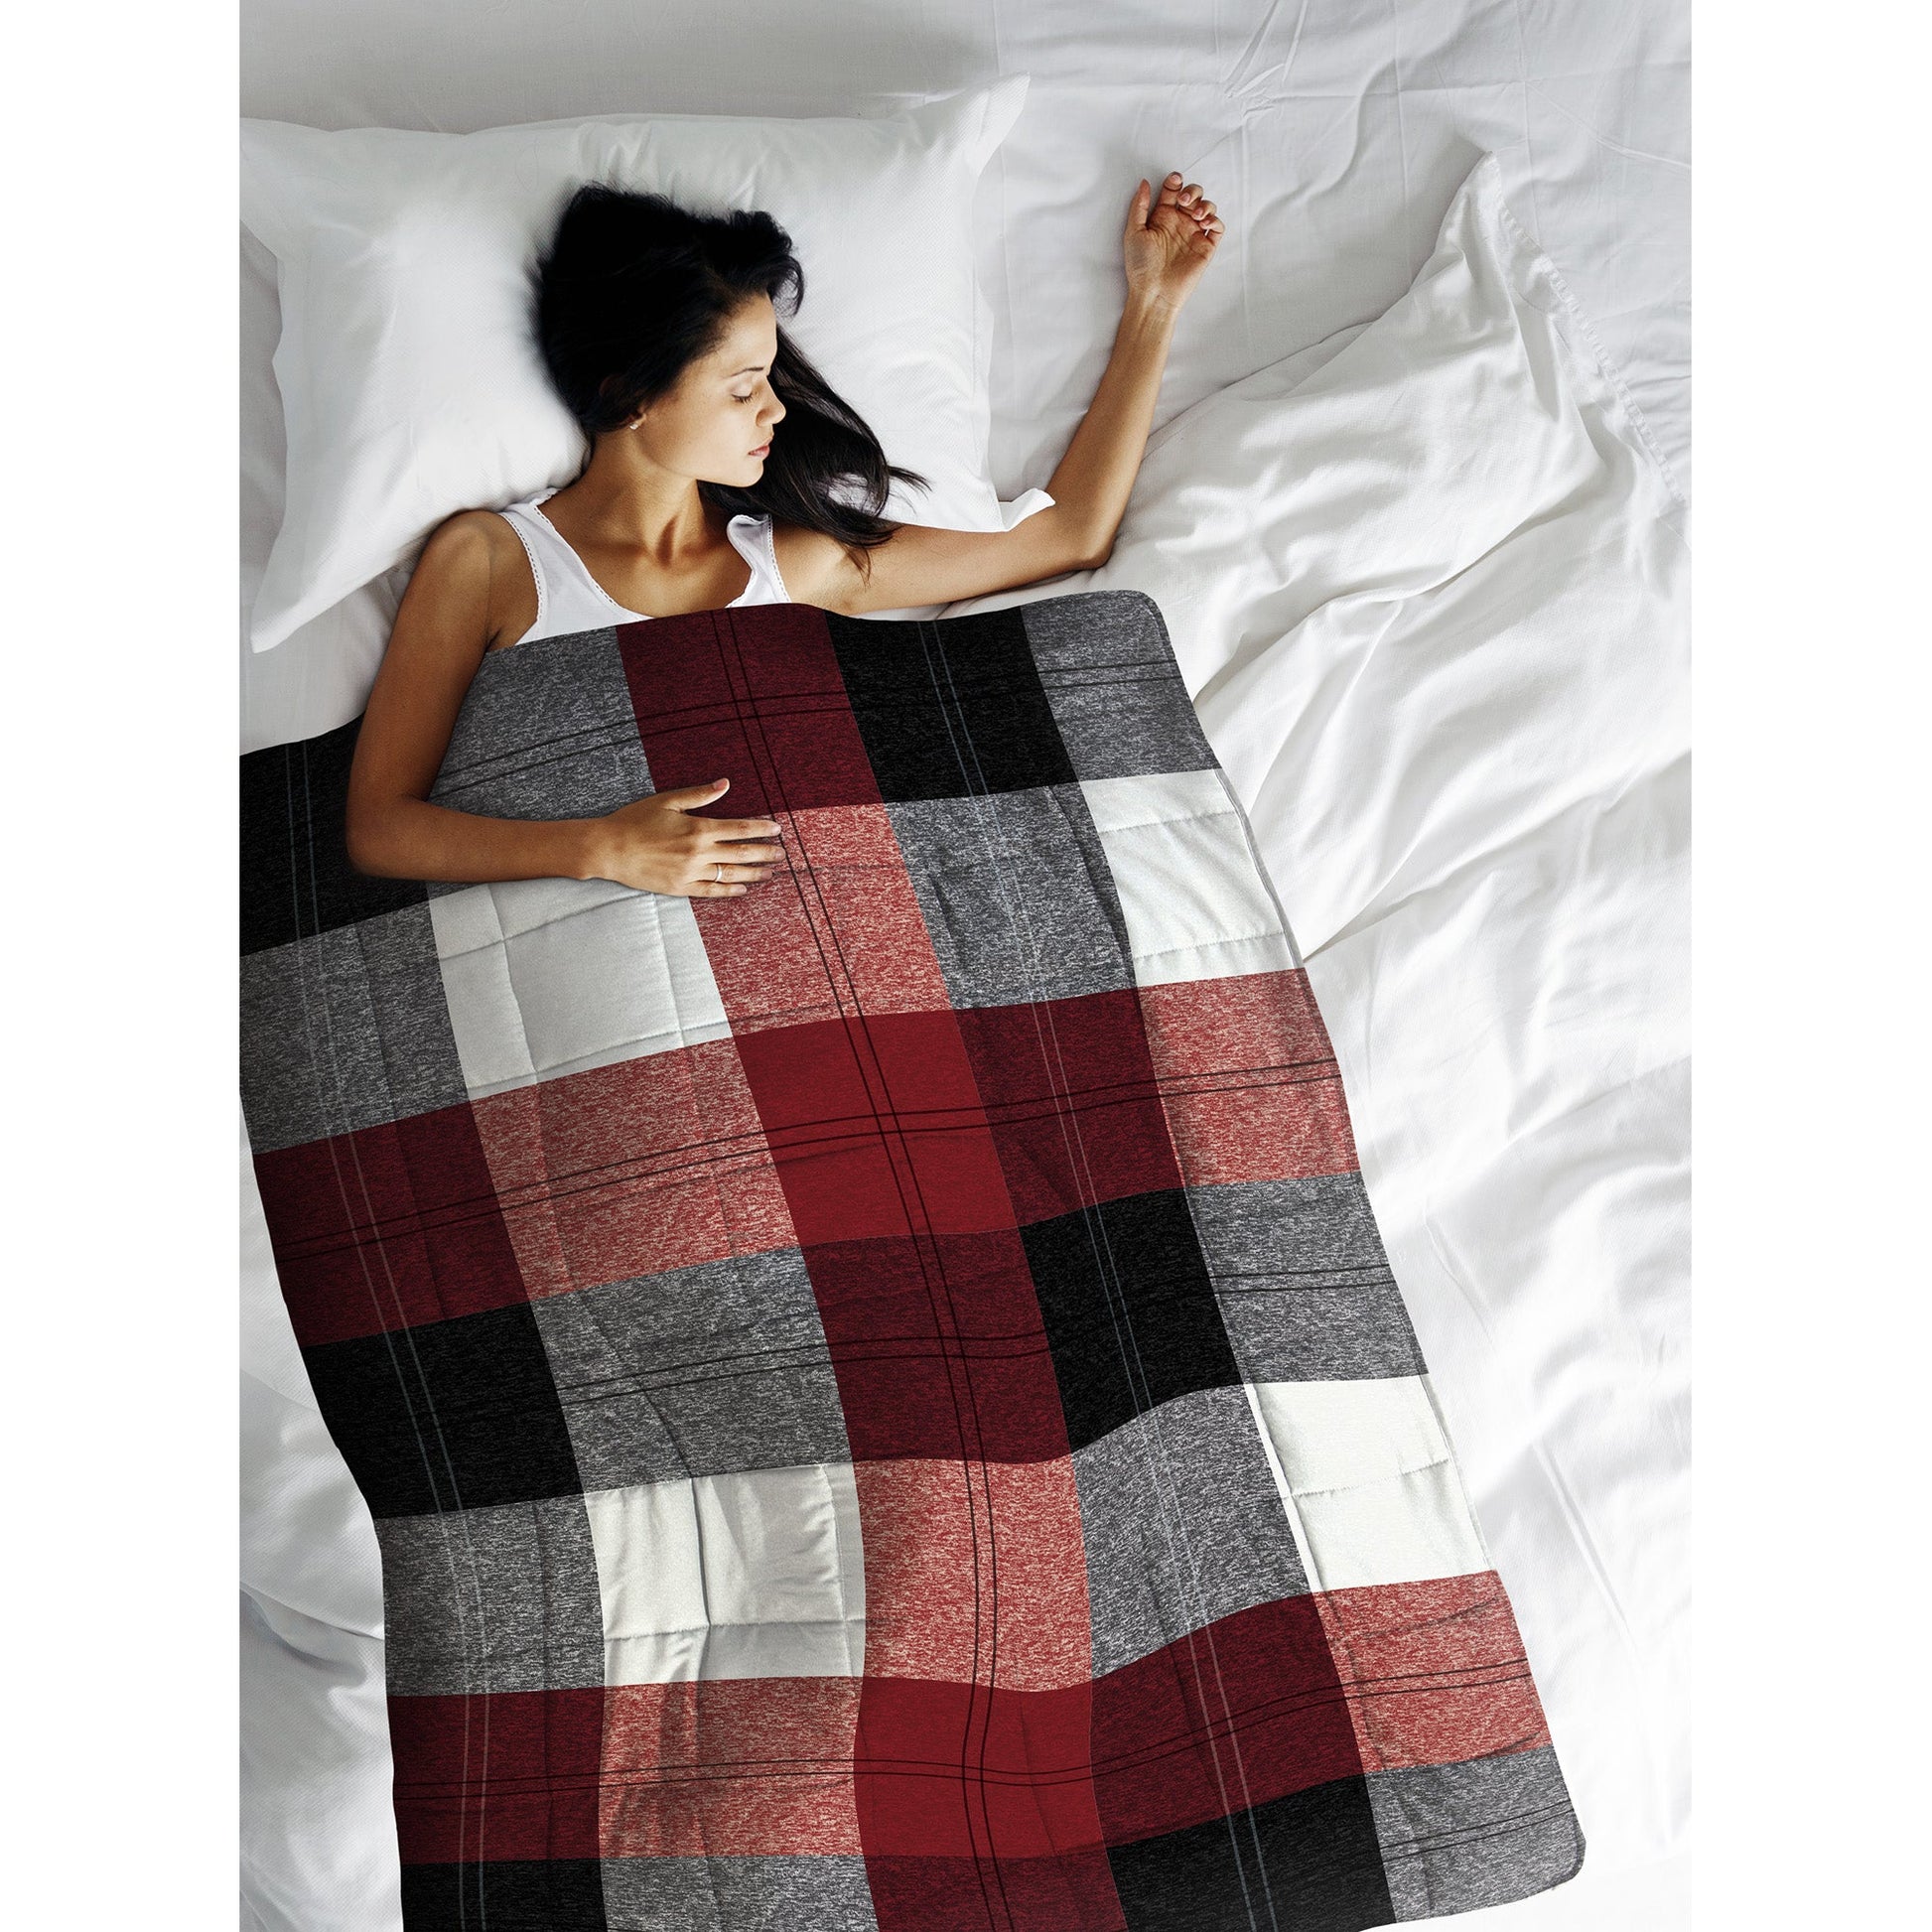 Super Soft Woven Weighted Blanket Throw Home Decor Bedding 40X60 Winter Plaid - DecoElegance - Blanket Throw Home Bedding